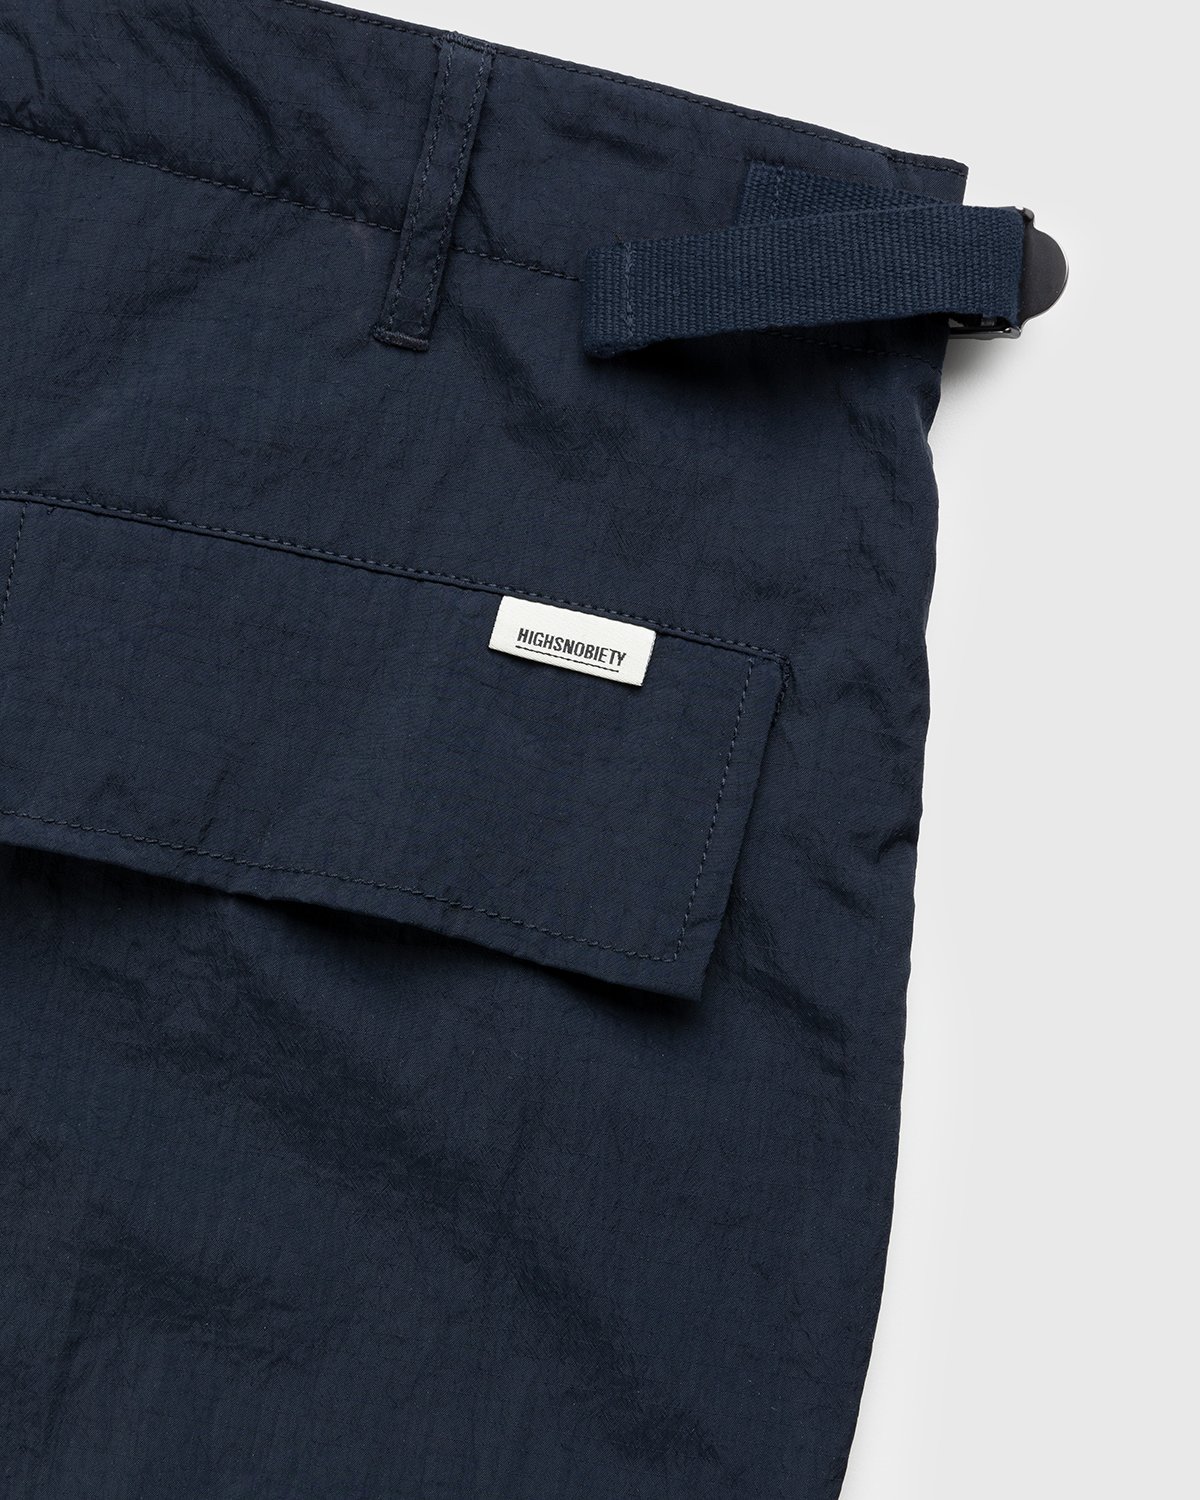 Highsnobiety - Water-Resistant Ripstop Cargo Pants Blue - Clothing - Blue - Image 5